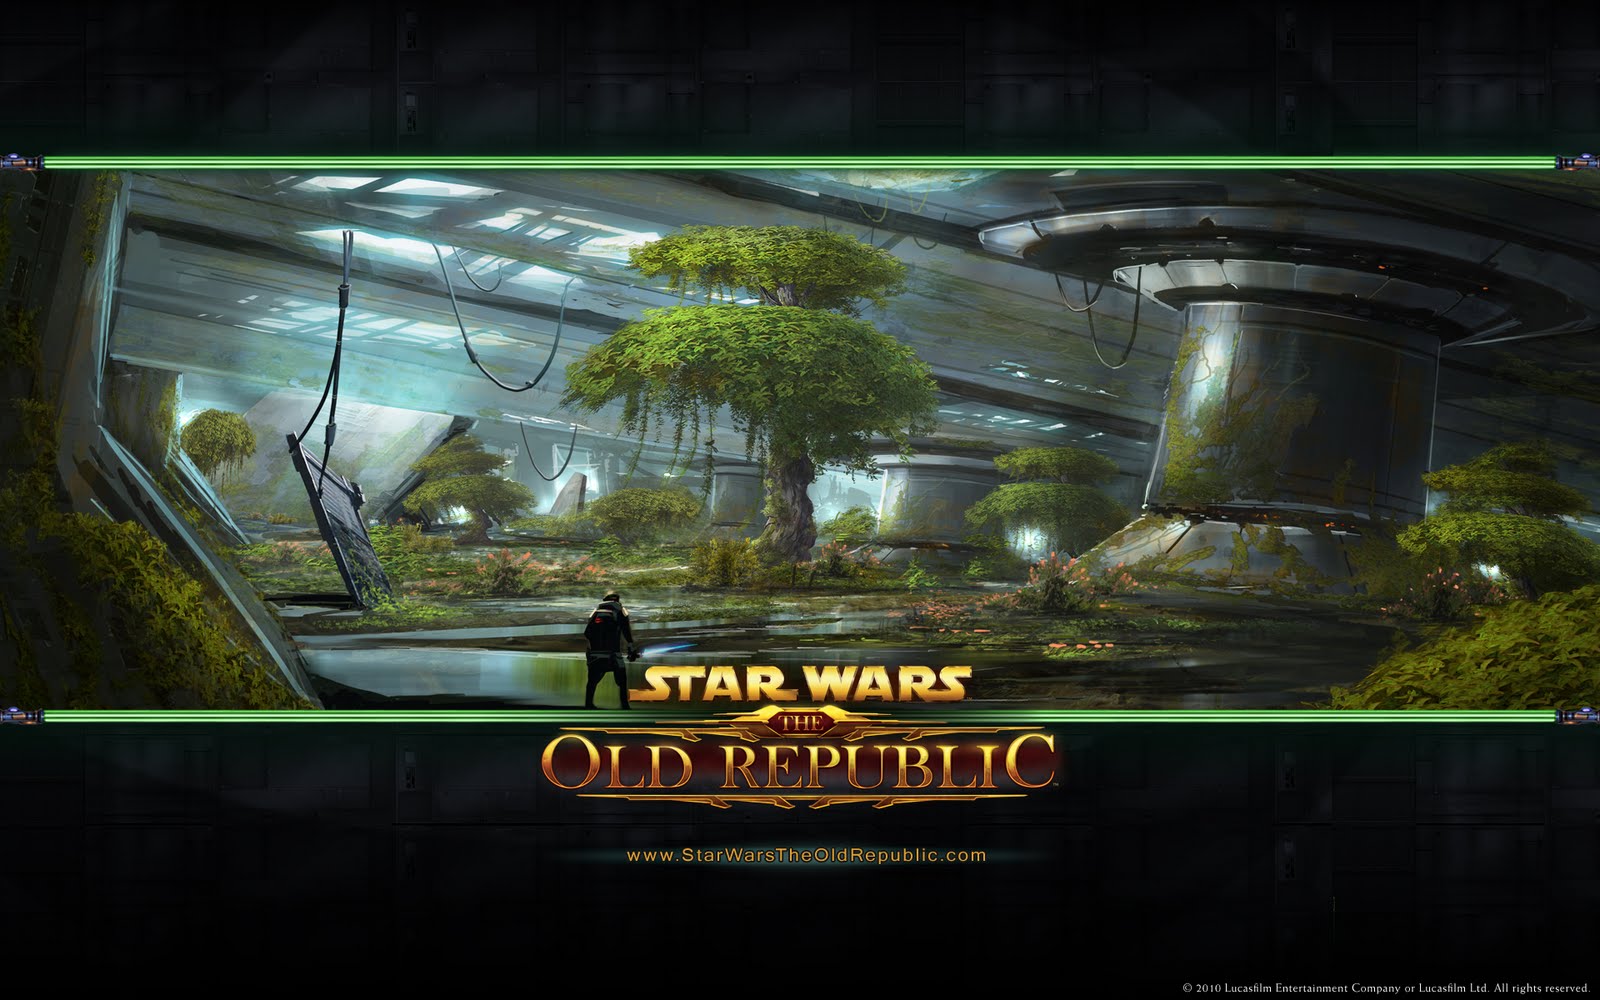 Star Wars The Old Republic Wallpaper Collection I Hd HD Wallpapers Download Free Images Wallpaper [wallpaper981.blogspot.com]